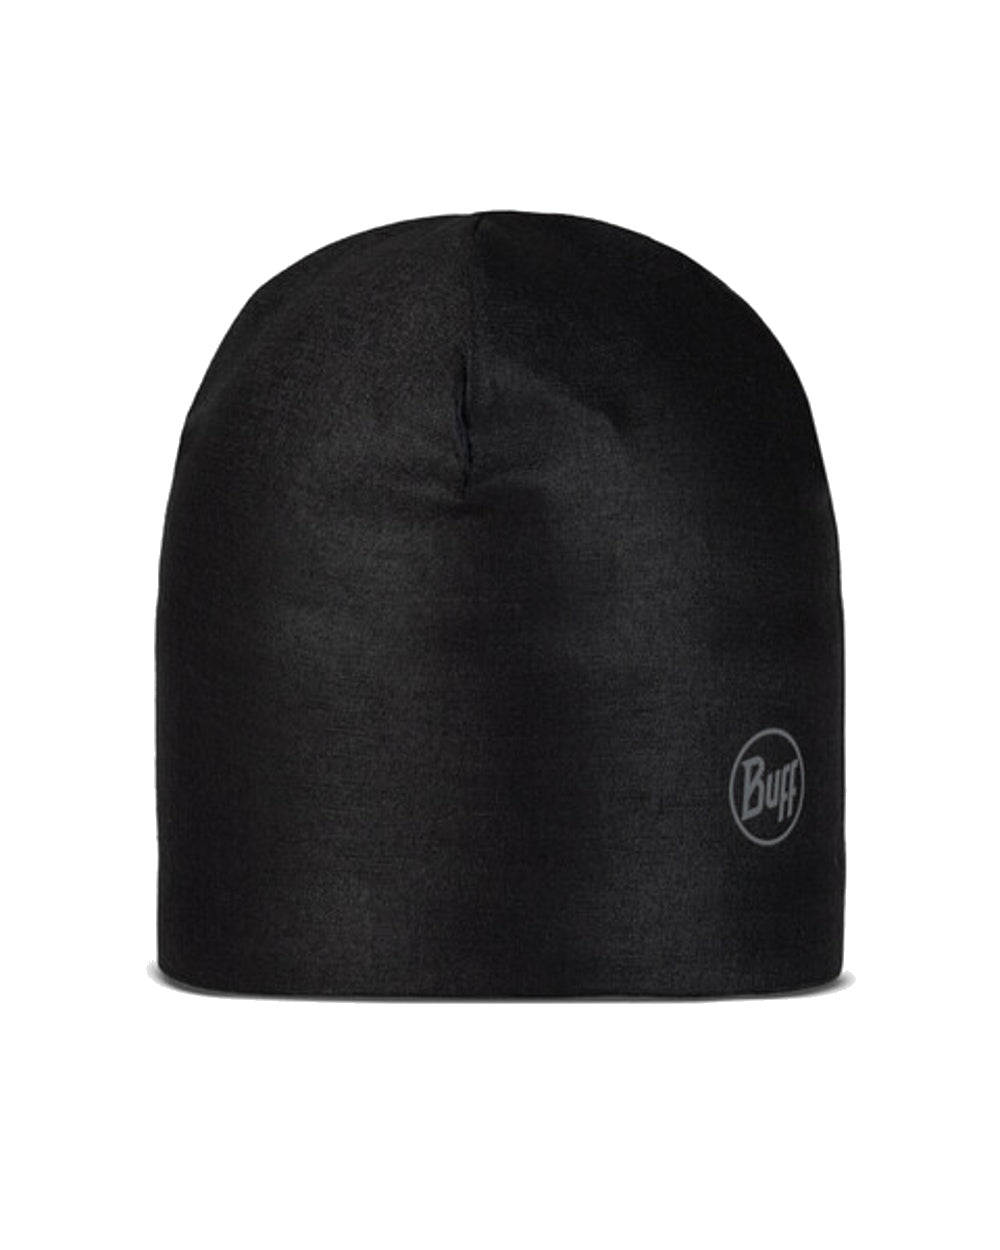 Buff Thermonet Beanie in Black 